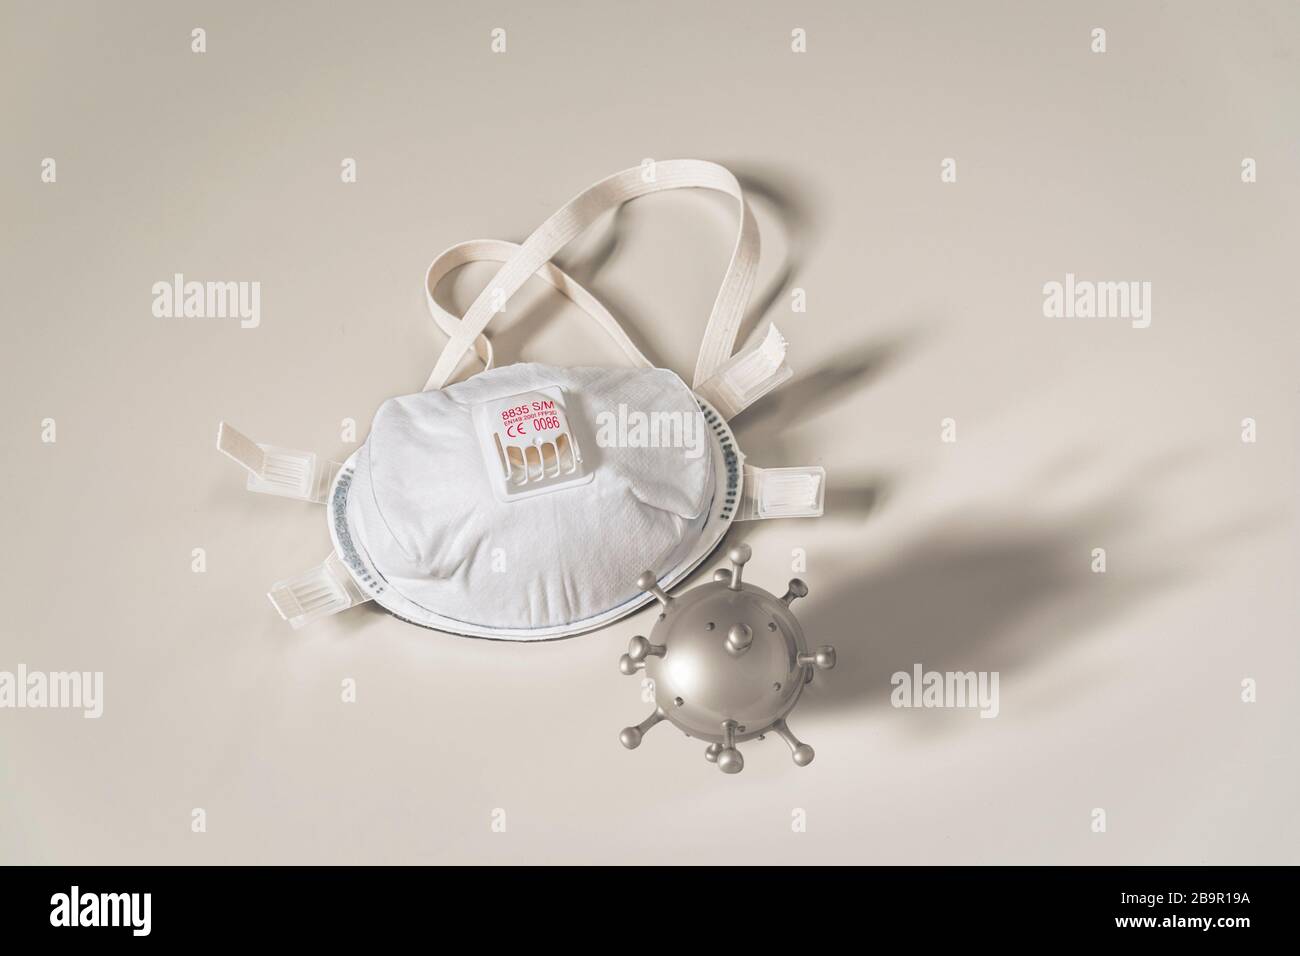 Respirator -  disposable medical mask and virus. Concept of hygiene and protection of human from contaminated environment. Copy space for text. Stock Photo